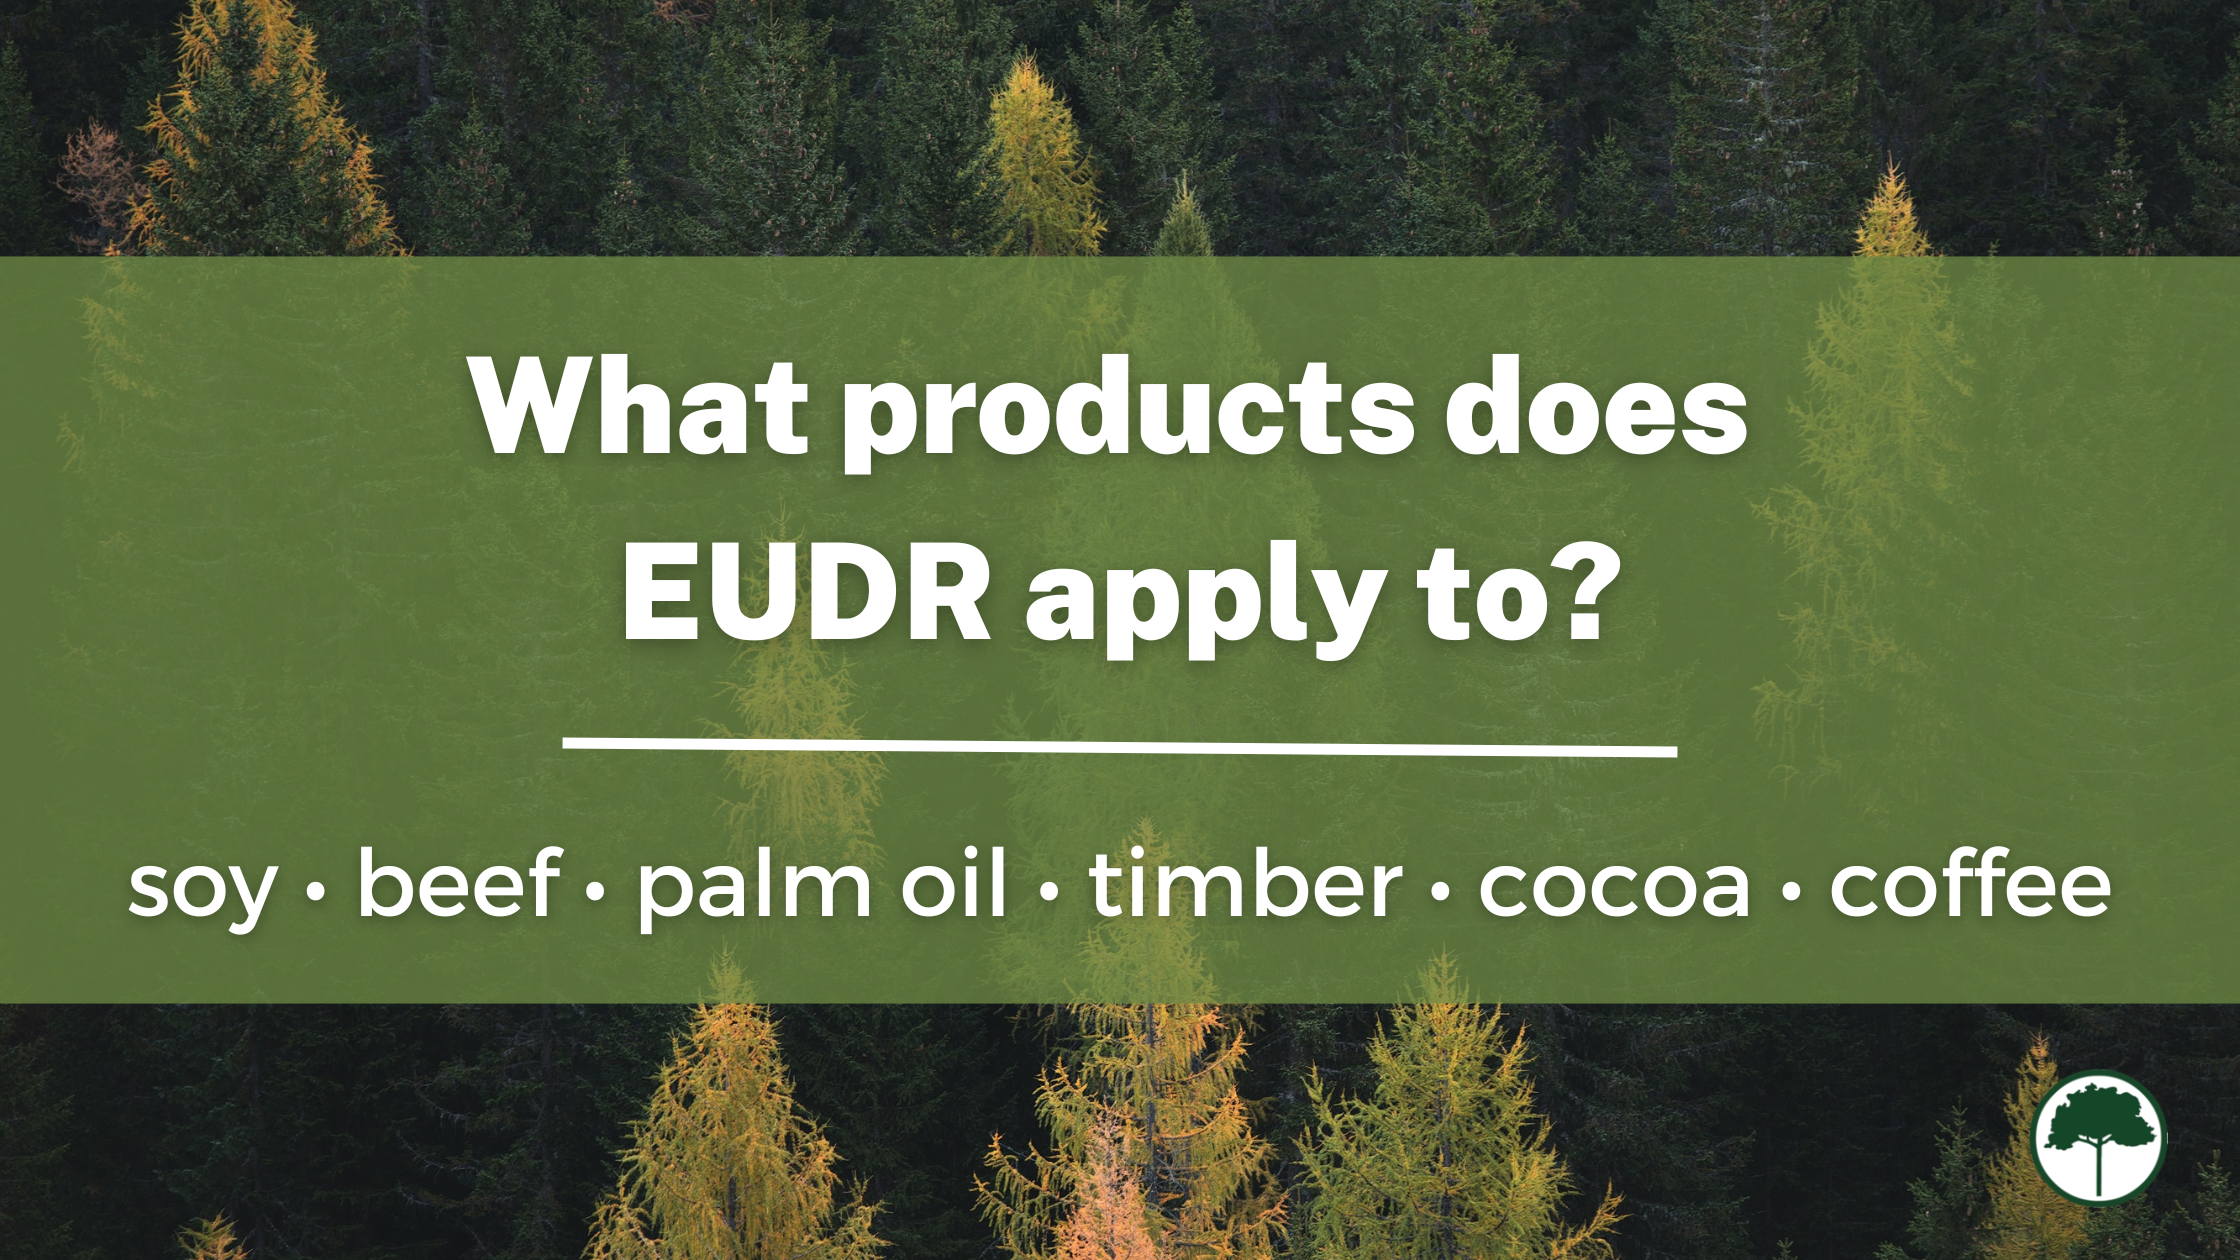 List of products that EUDR applies to: soy, beef, palm oil, timber, cocoa, coffee